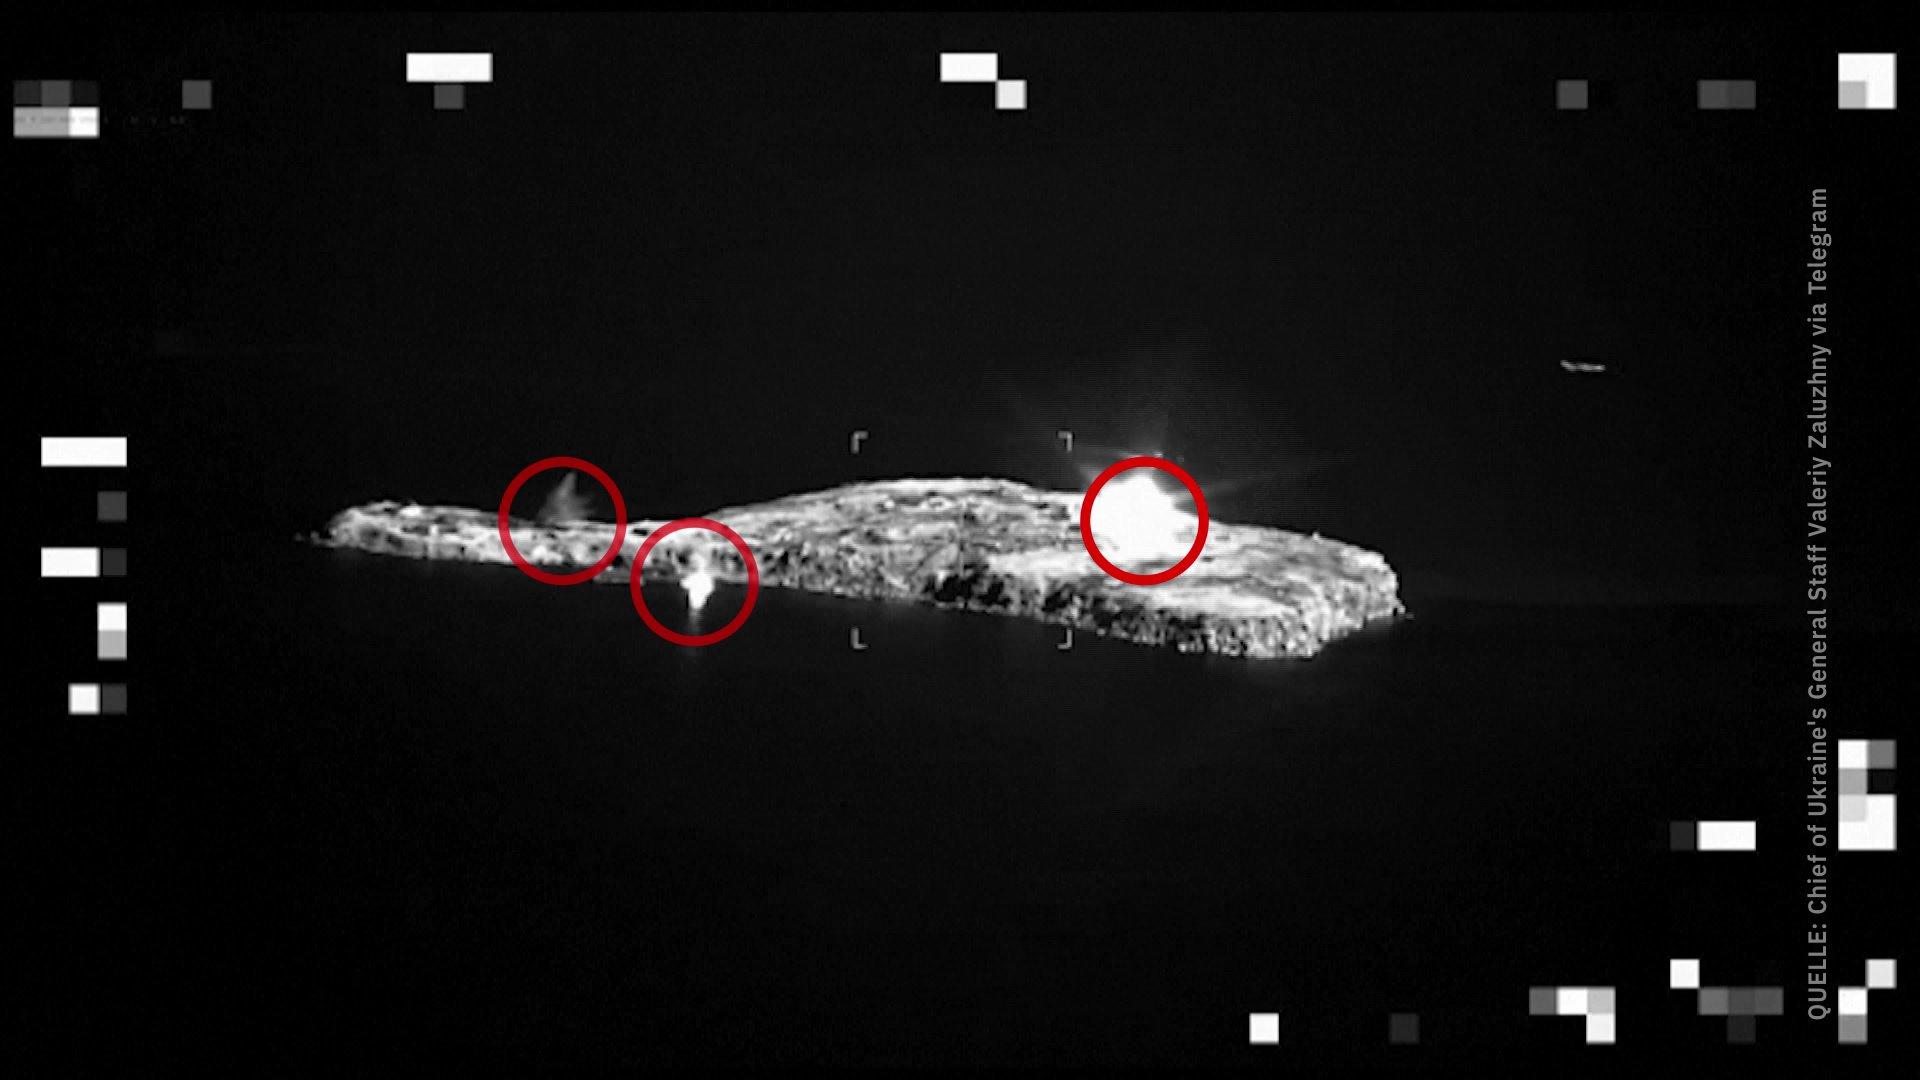 Photos are said to show Russians using phosphorus bombs to attack Snake Island